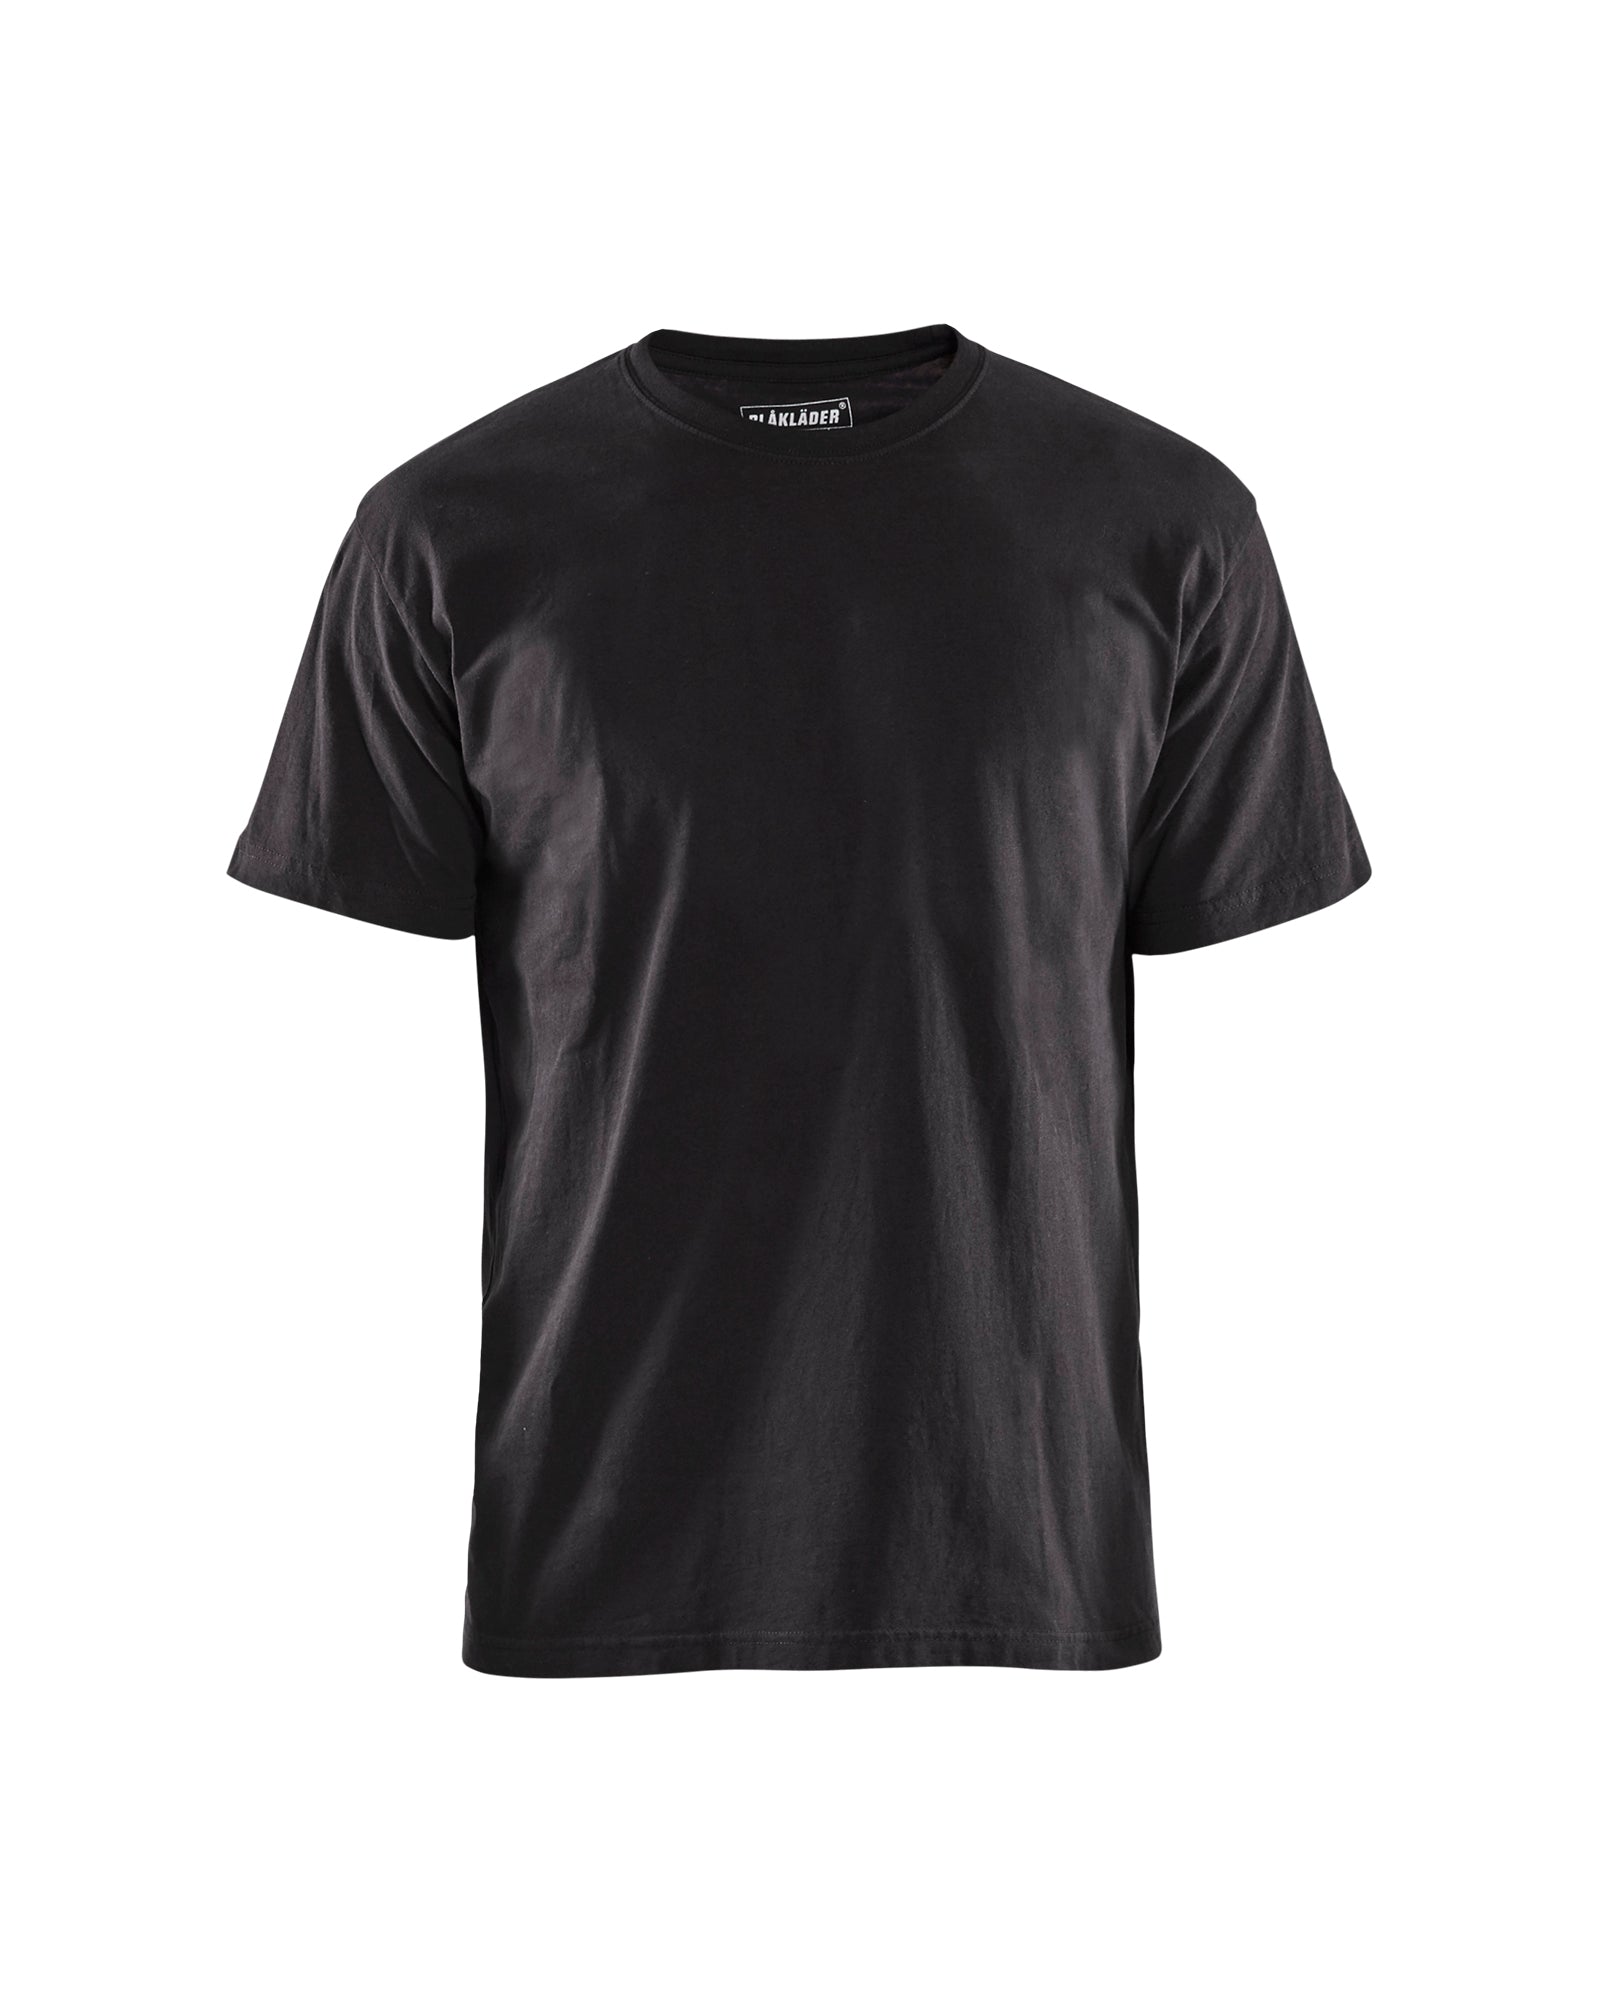 Men's Blaklader US Short Sleeves T-Shirt in Black from the front view